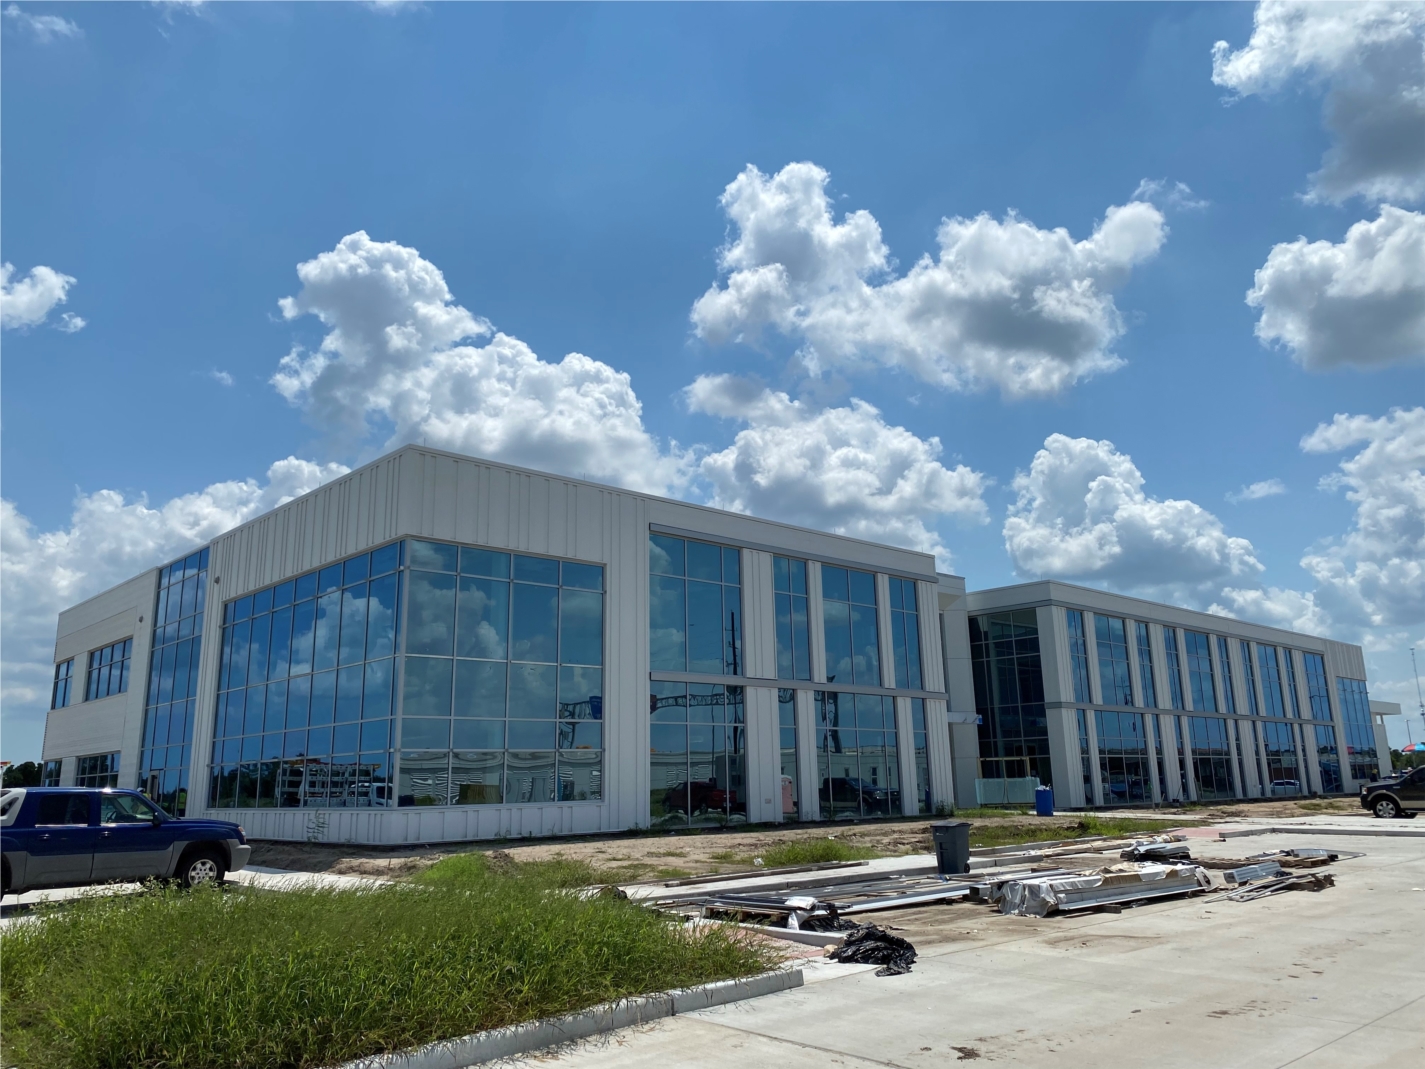 Continued successes bring additional milestones and in fall of 2020 Vector CAG and manufacturing partner Endress+Hauser will move into their new Gulf Coast Regional Center Campus. People make the difference and we stand by our commitment to simply be the best.